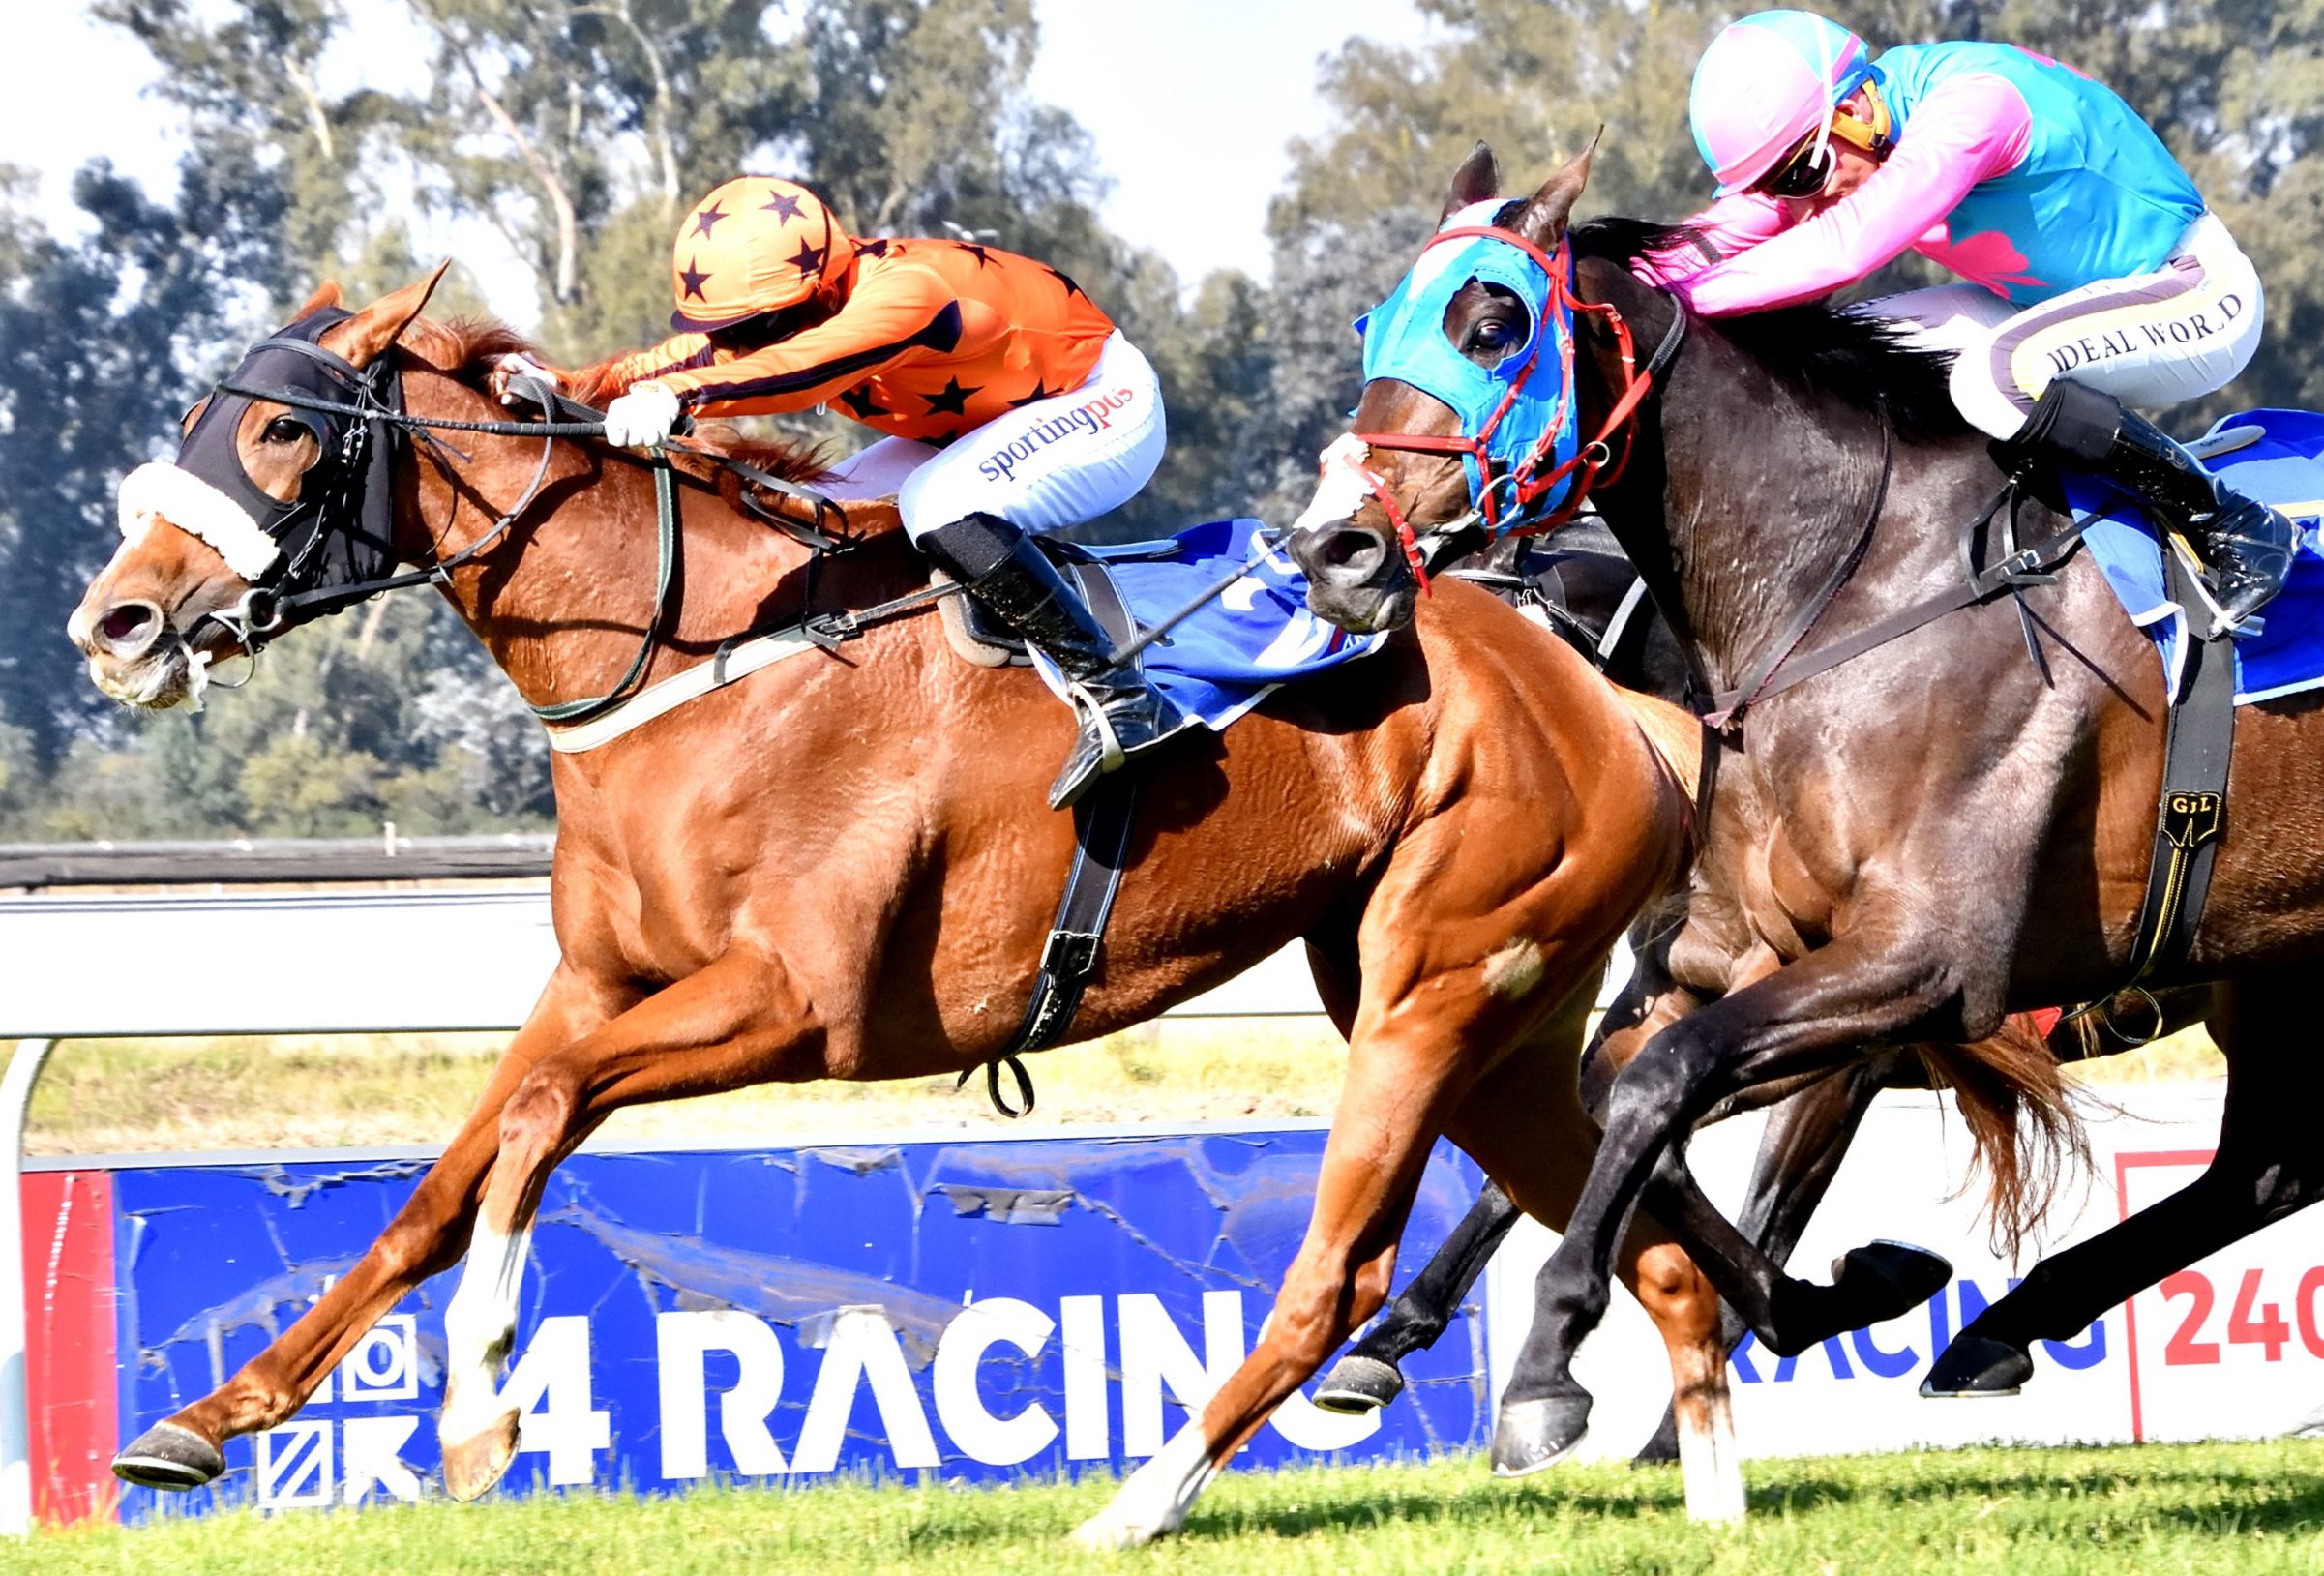 Nuclear Force (Gavin Lerena) will meet Kakiebos (Kaidan Brewer) in a rematch today at Turffontein